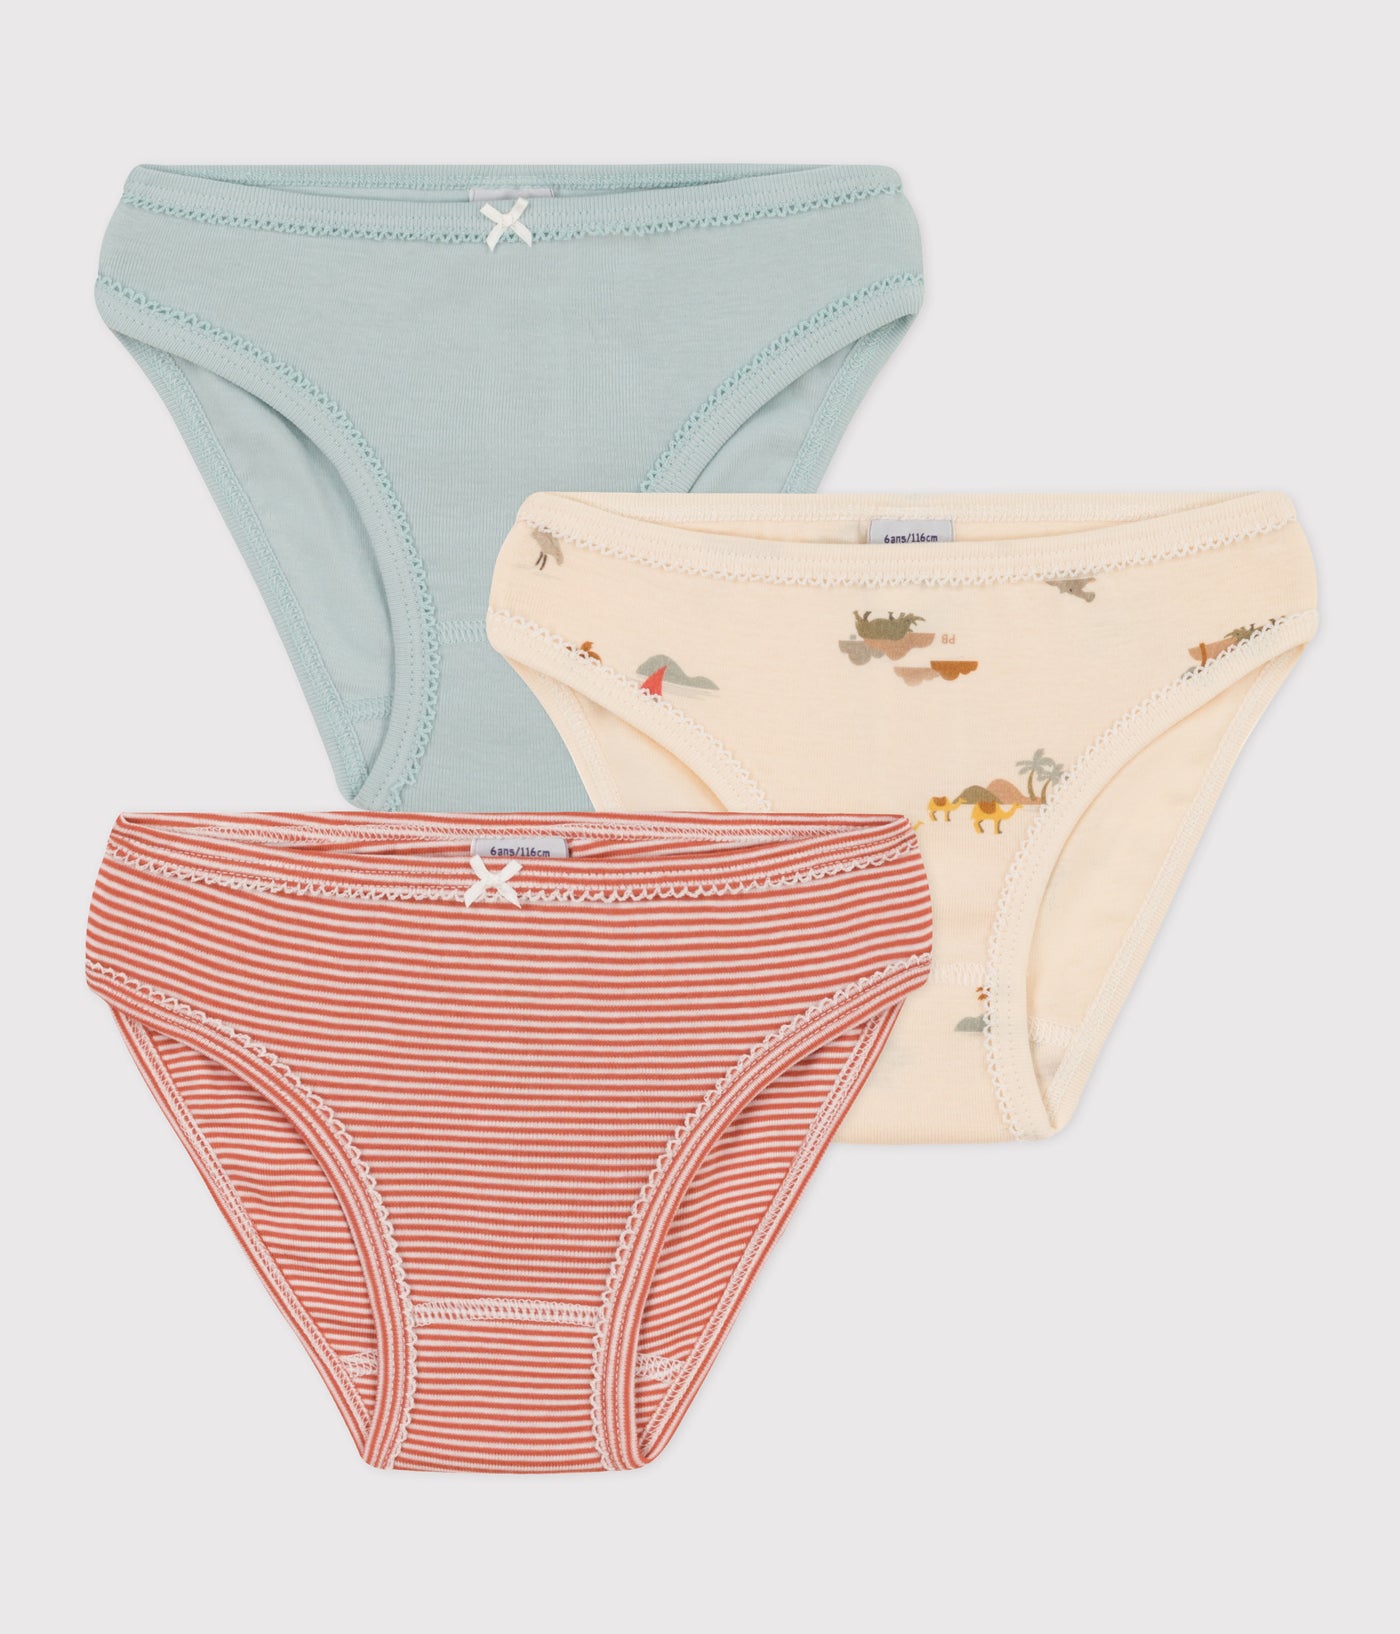 GIRLS' ANIMAL PATTERNED COTTON BRIEFS - 3-PACK